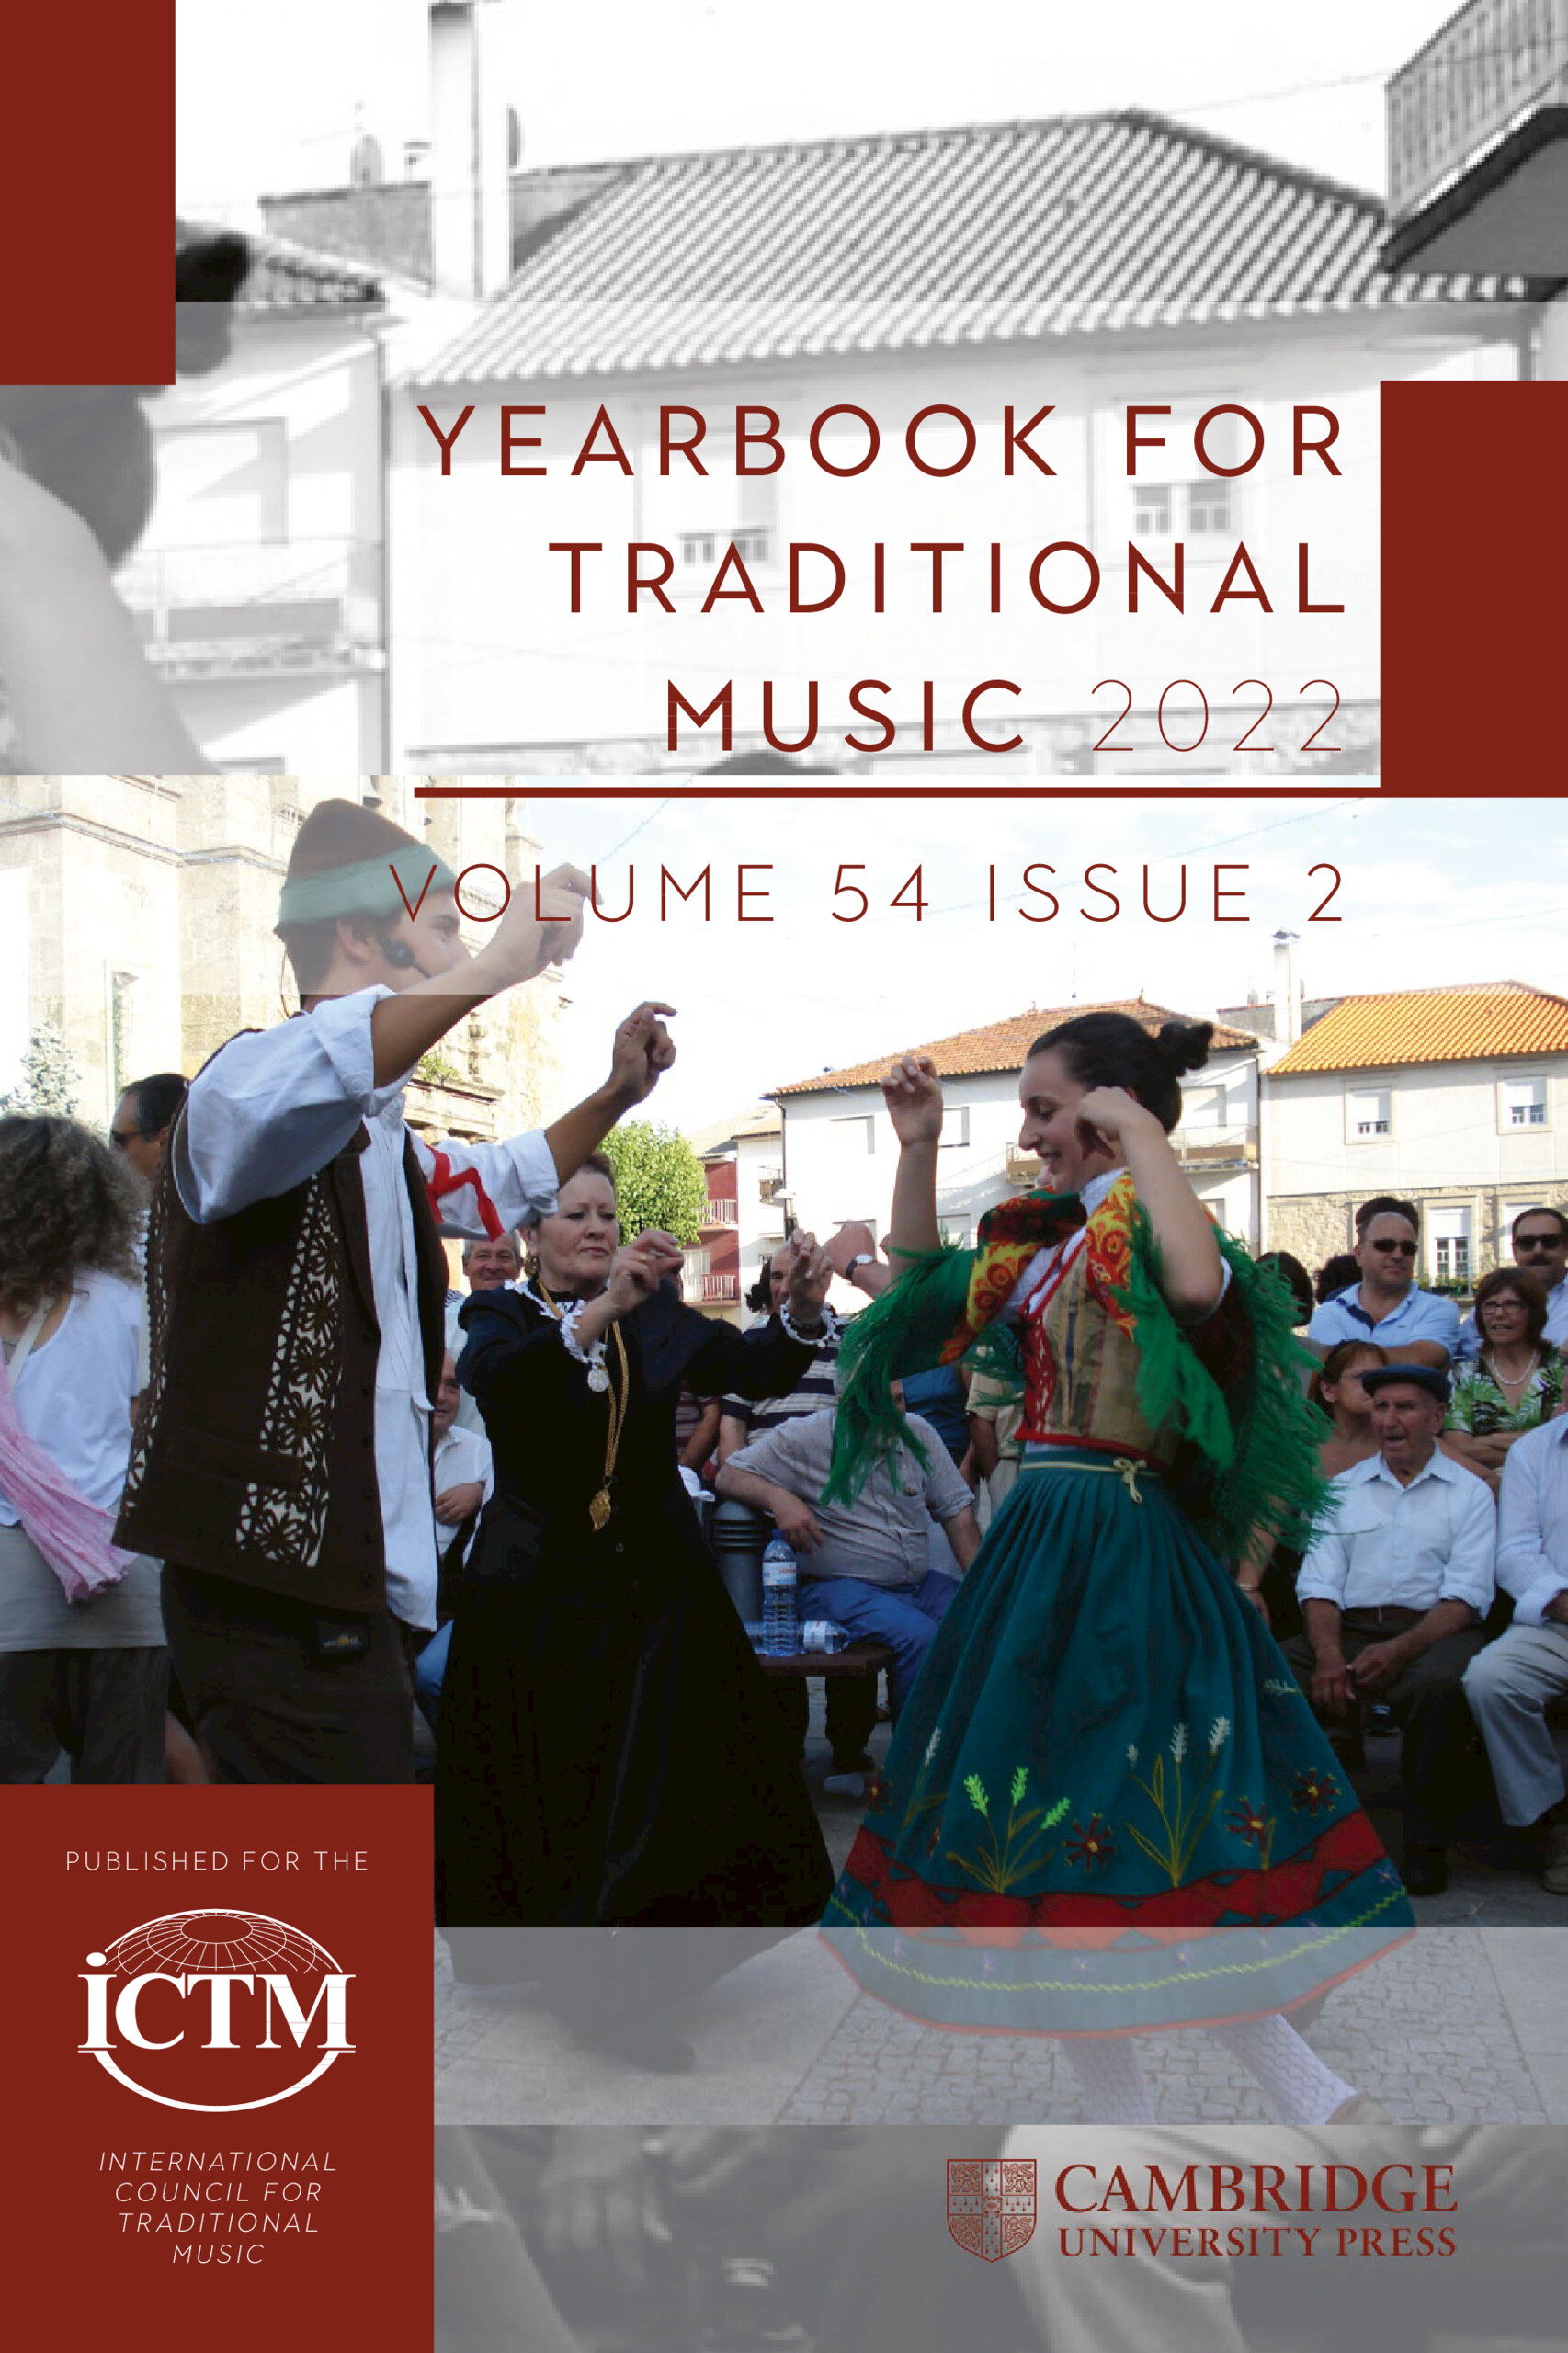 Yearbook for traditional music.